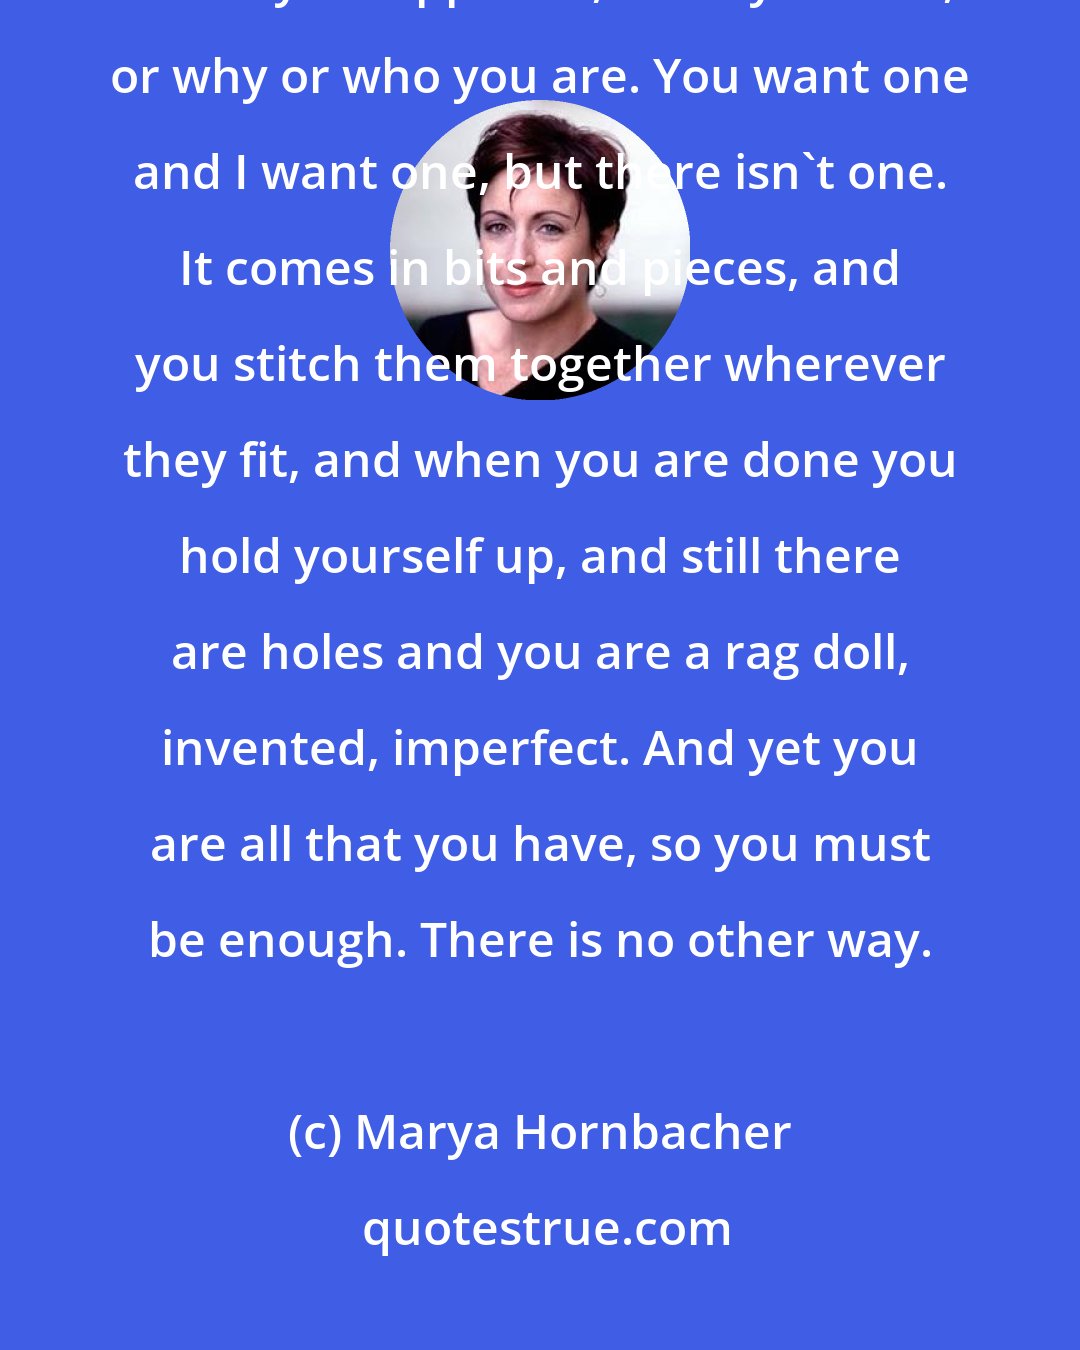 Marya Hornbacher: There is never a sudden revelation, a complete and tidy explanation for why it happened, or why it ends, or why or who you are. You want one and I want one, but there isn't one. It comes in bits and pieces, and you stitch them together wherever they fit, and when you are done you hold yourself up, and still there are holes and you are a rag doll, invented, imperfect. And yet you are all that you have, so you must be enough. There is no other way.